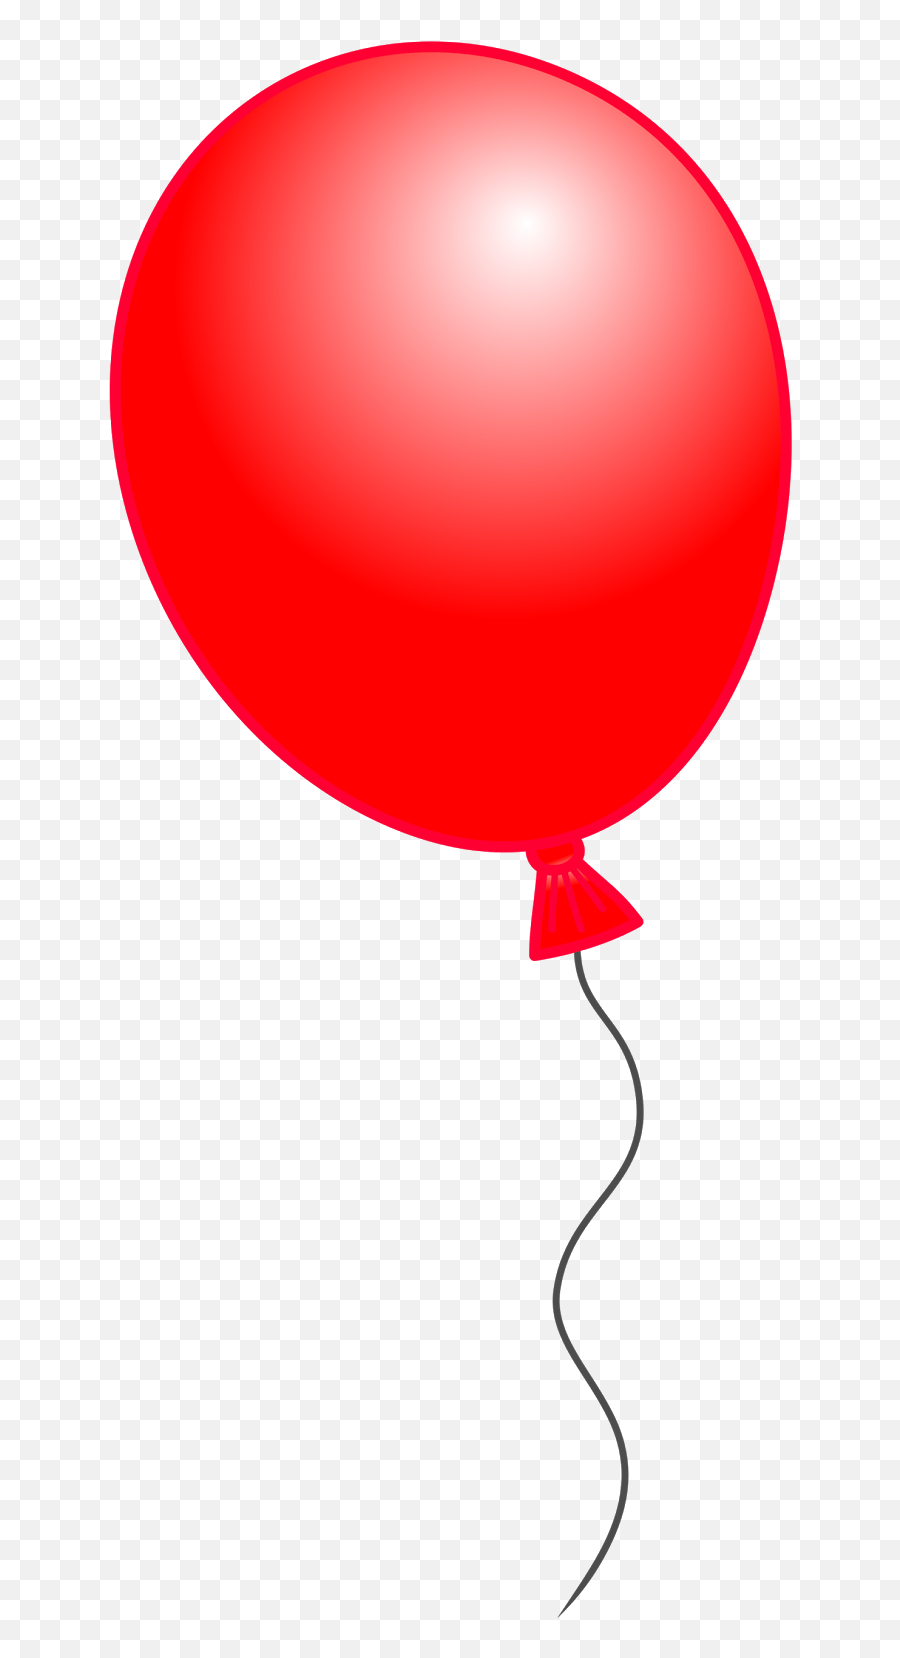 Free Red Balloon Transparent Background Download Free Clip - Clipart Ballon Emoji,Red Balloon Emoji